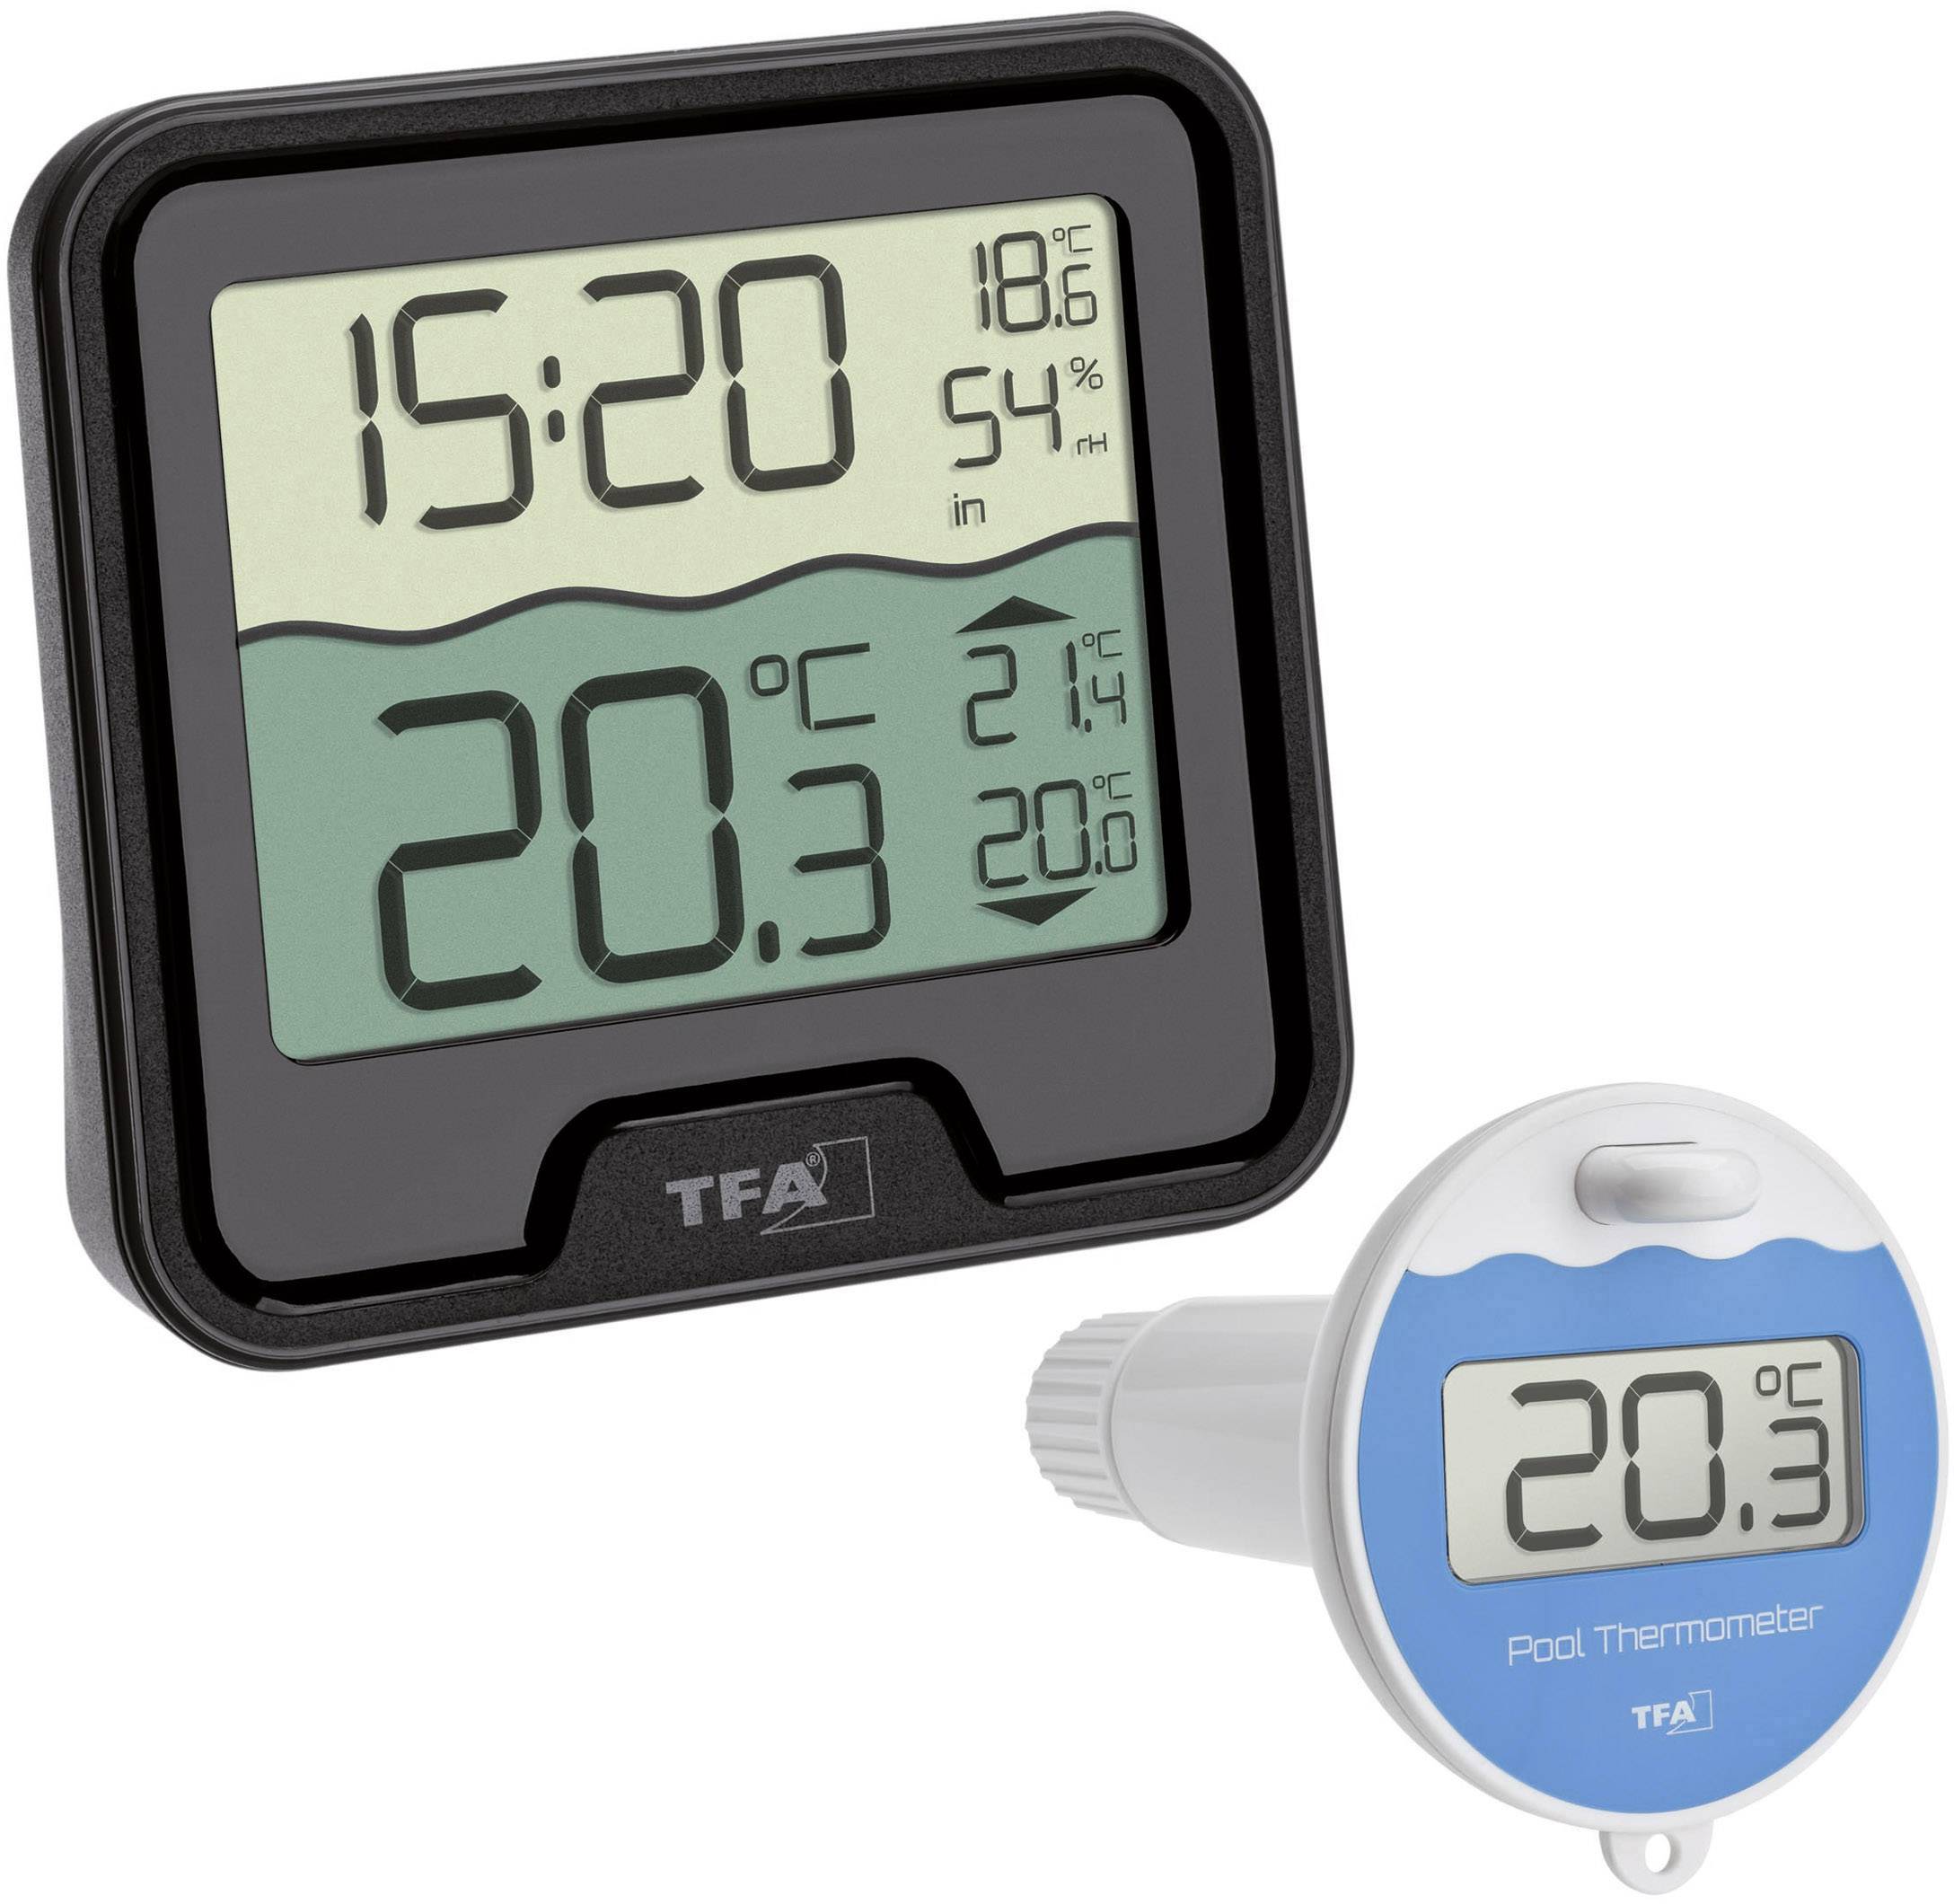 TFA 30.3066.54.13 digitales Funk Poolthermometer Marbella Schwimmbadthermometer 